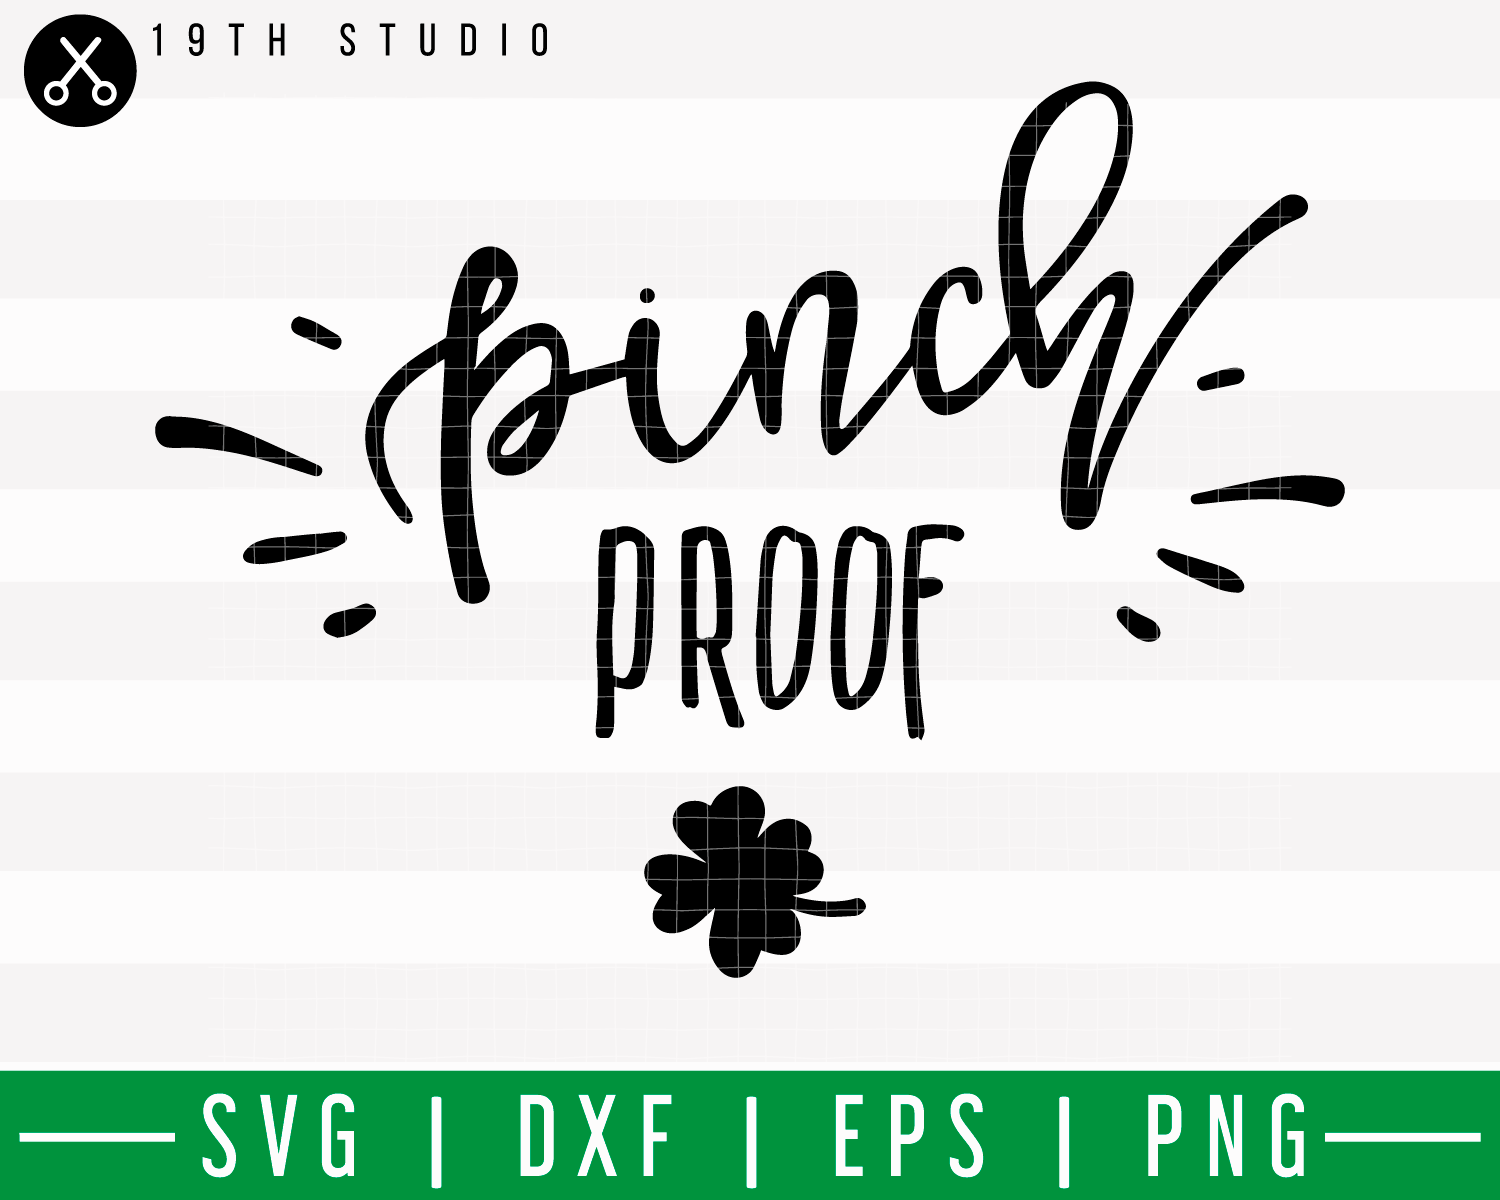 Pinch Proof V2 SVG | M18F21 Craft House SVG - SVG files for Cricut and Silhouette